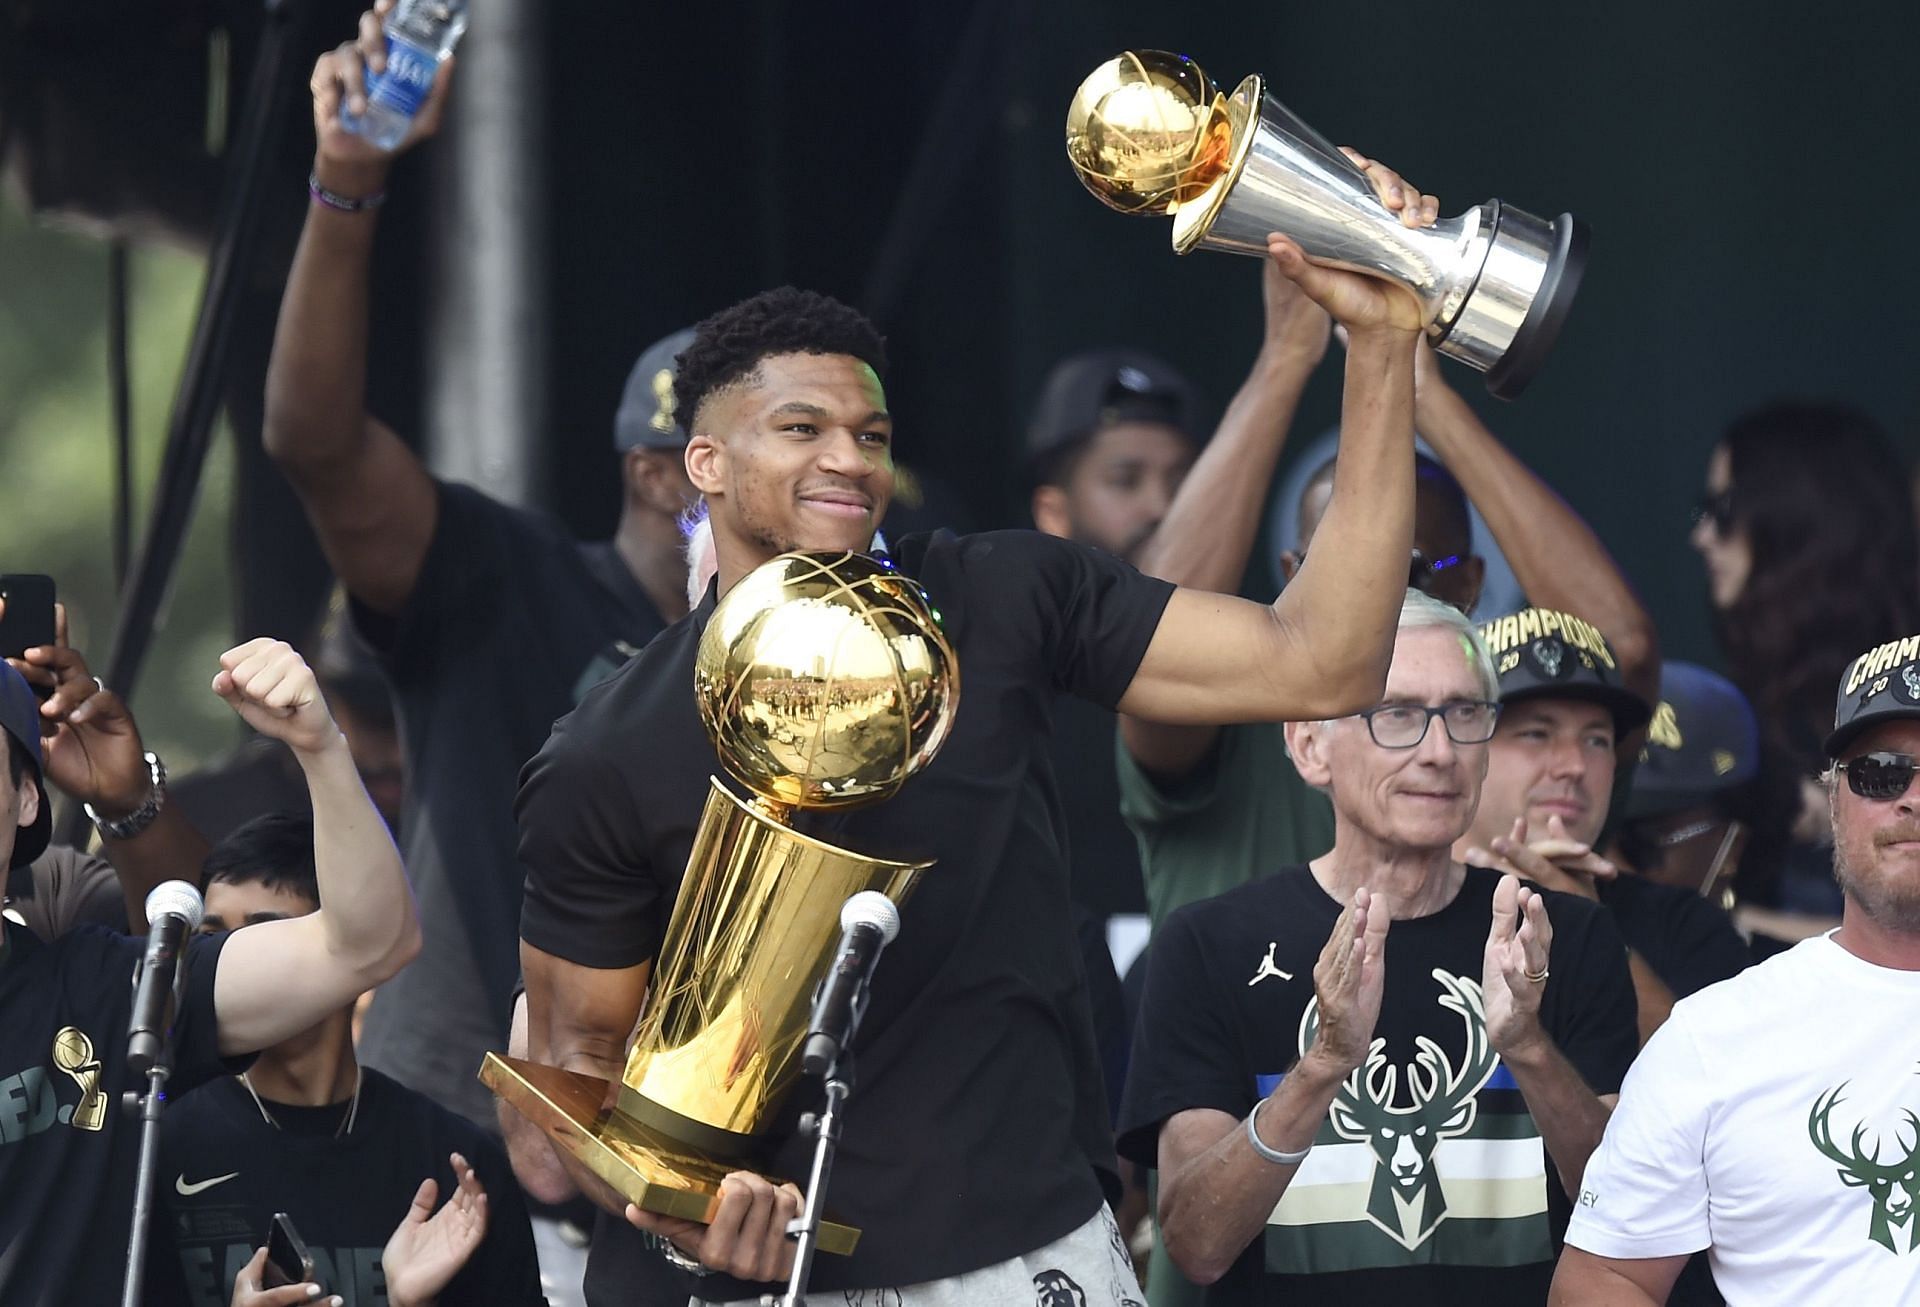 Giannis Antetokounmpo will receive his NBA Finals ring on opening night on Tuesday